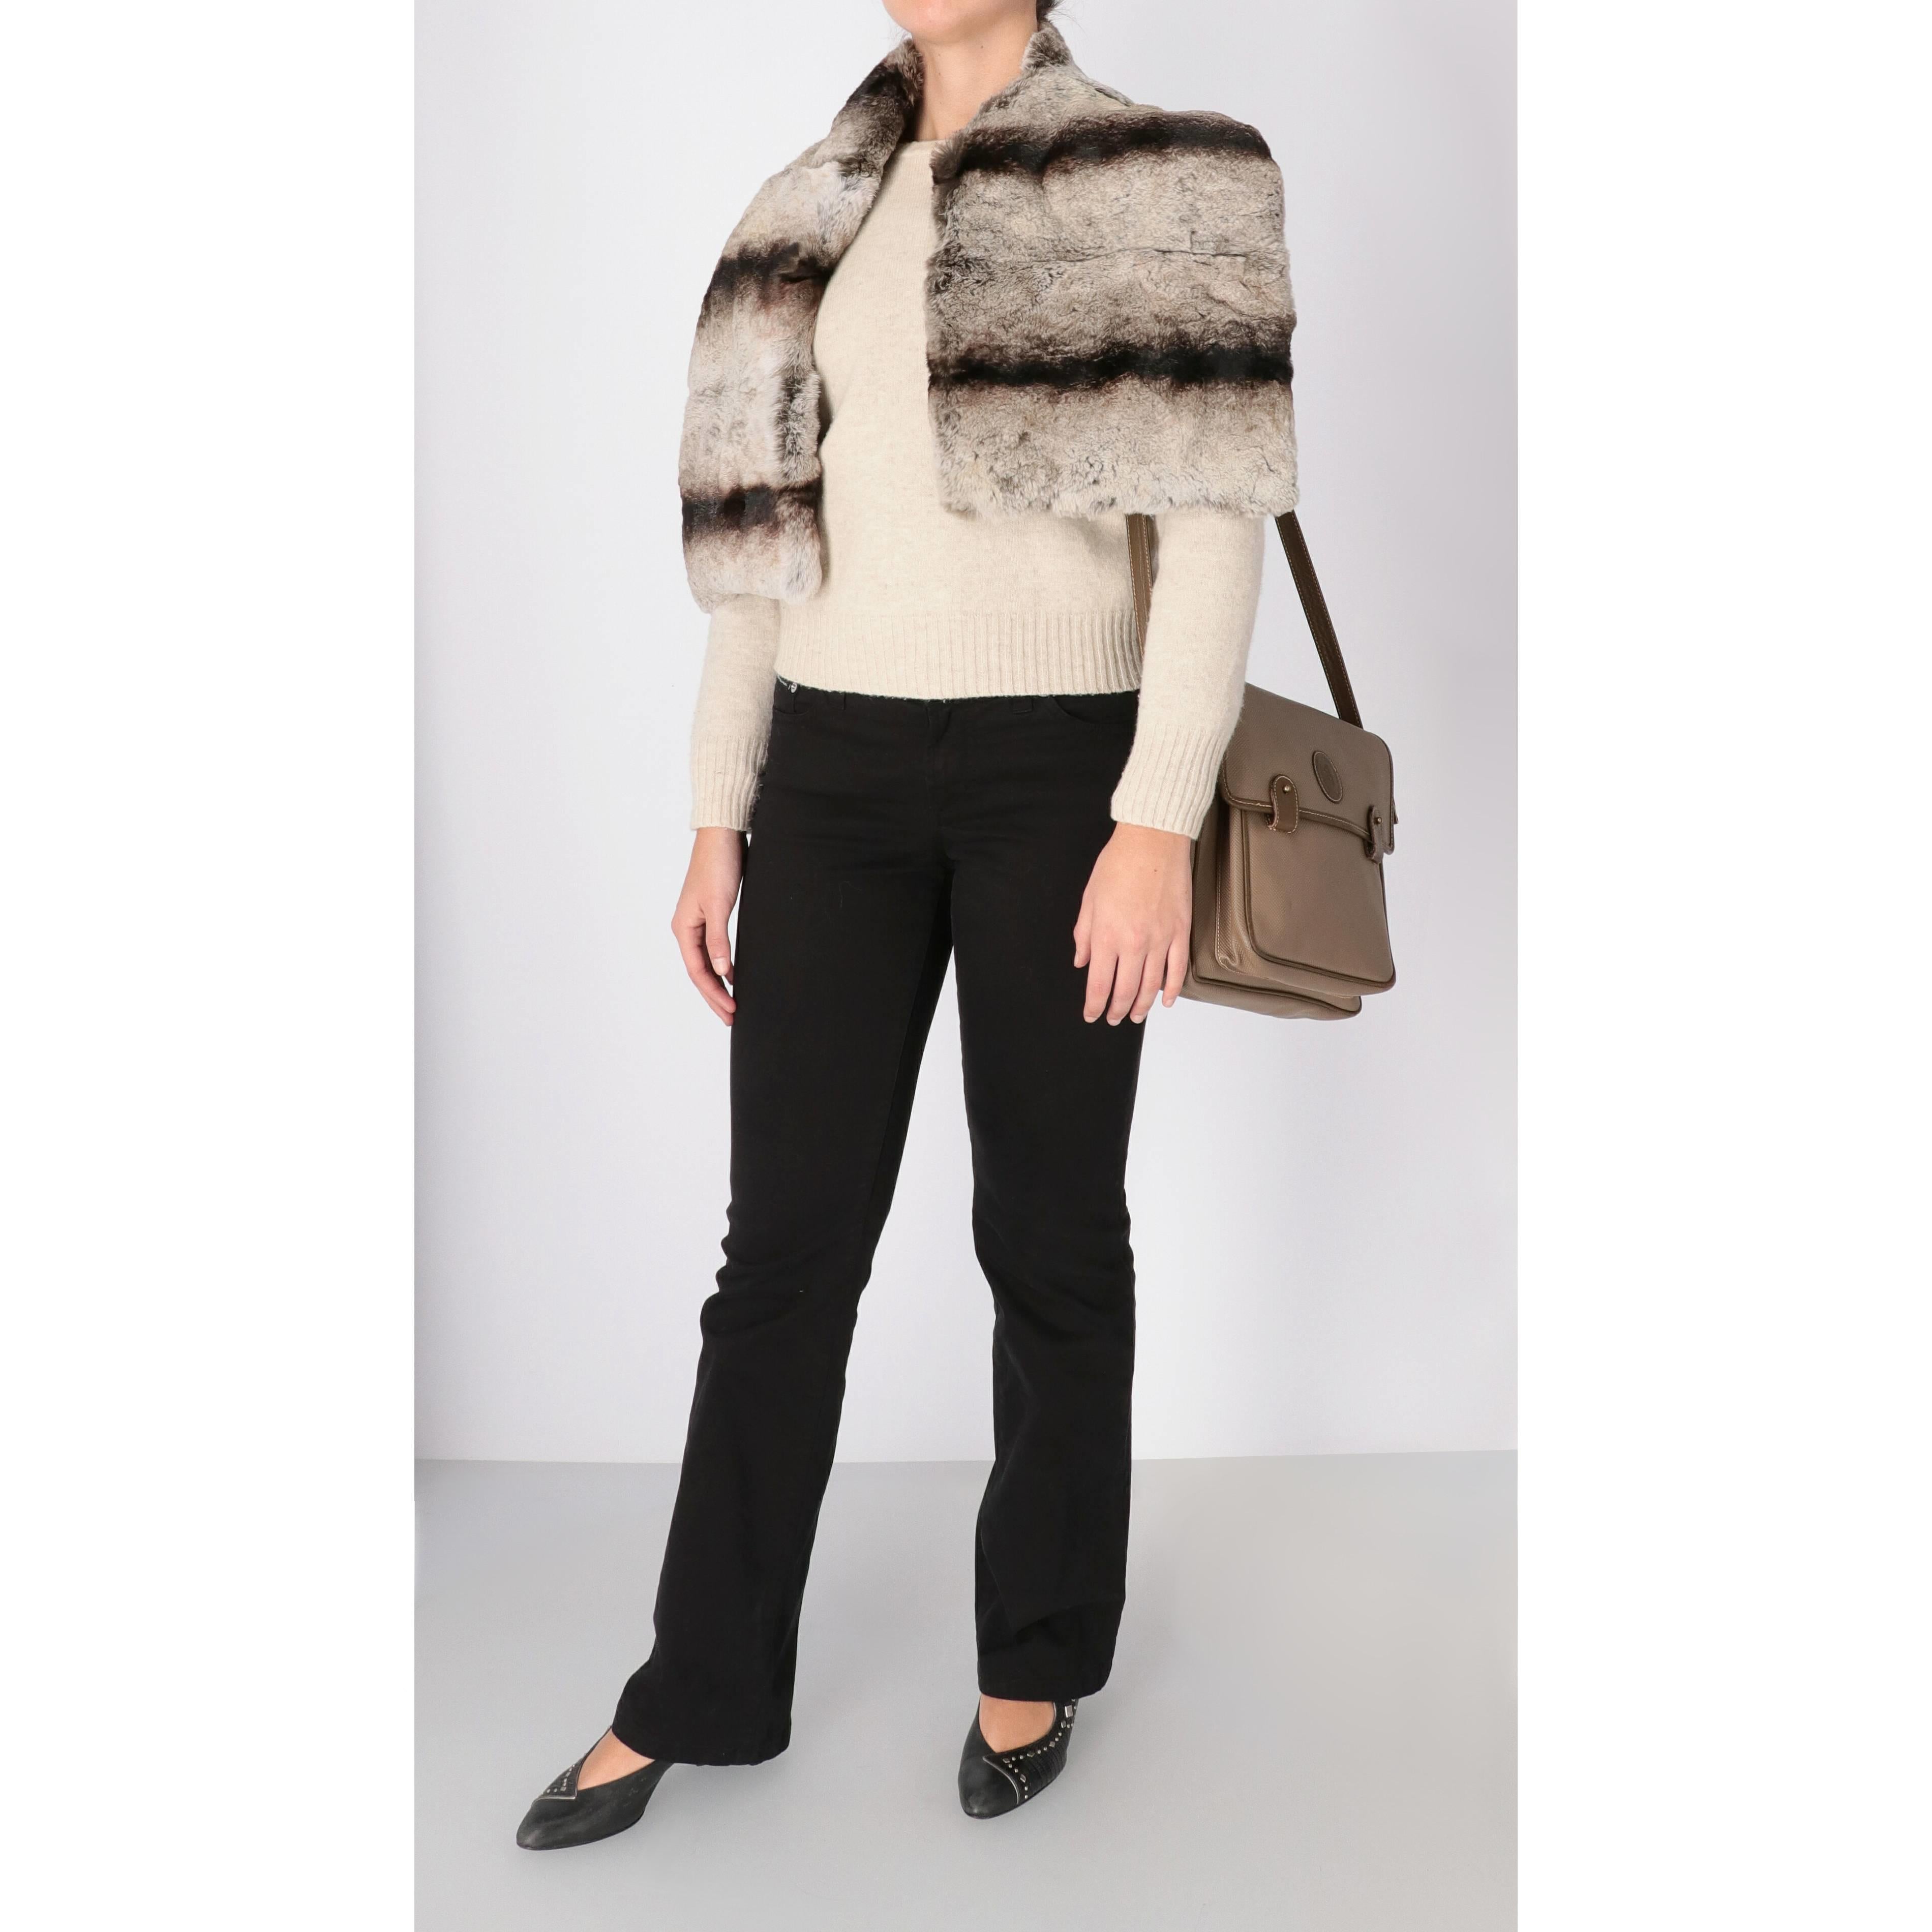 Gianfranco Ferré collar with asymmetrical design in chinchilla fur in shades of black and gray. Lined in printed fabric. 

This is a sample without the brand label.

Please note this item cannot be shipped outside the European Union.

Years: